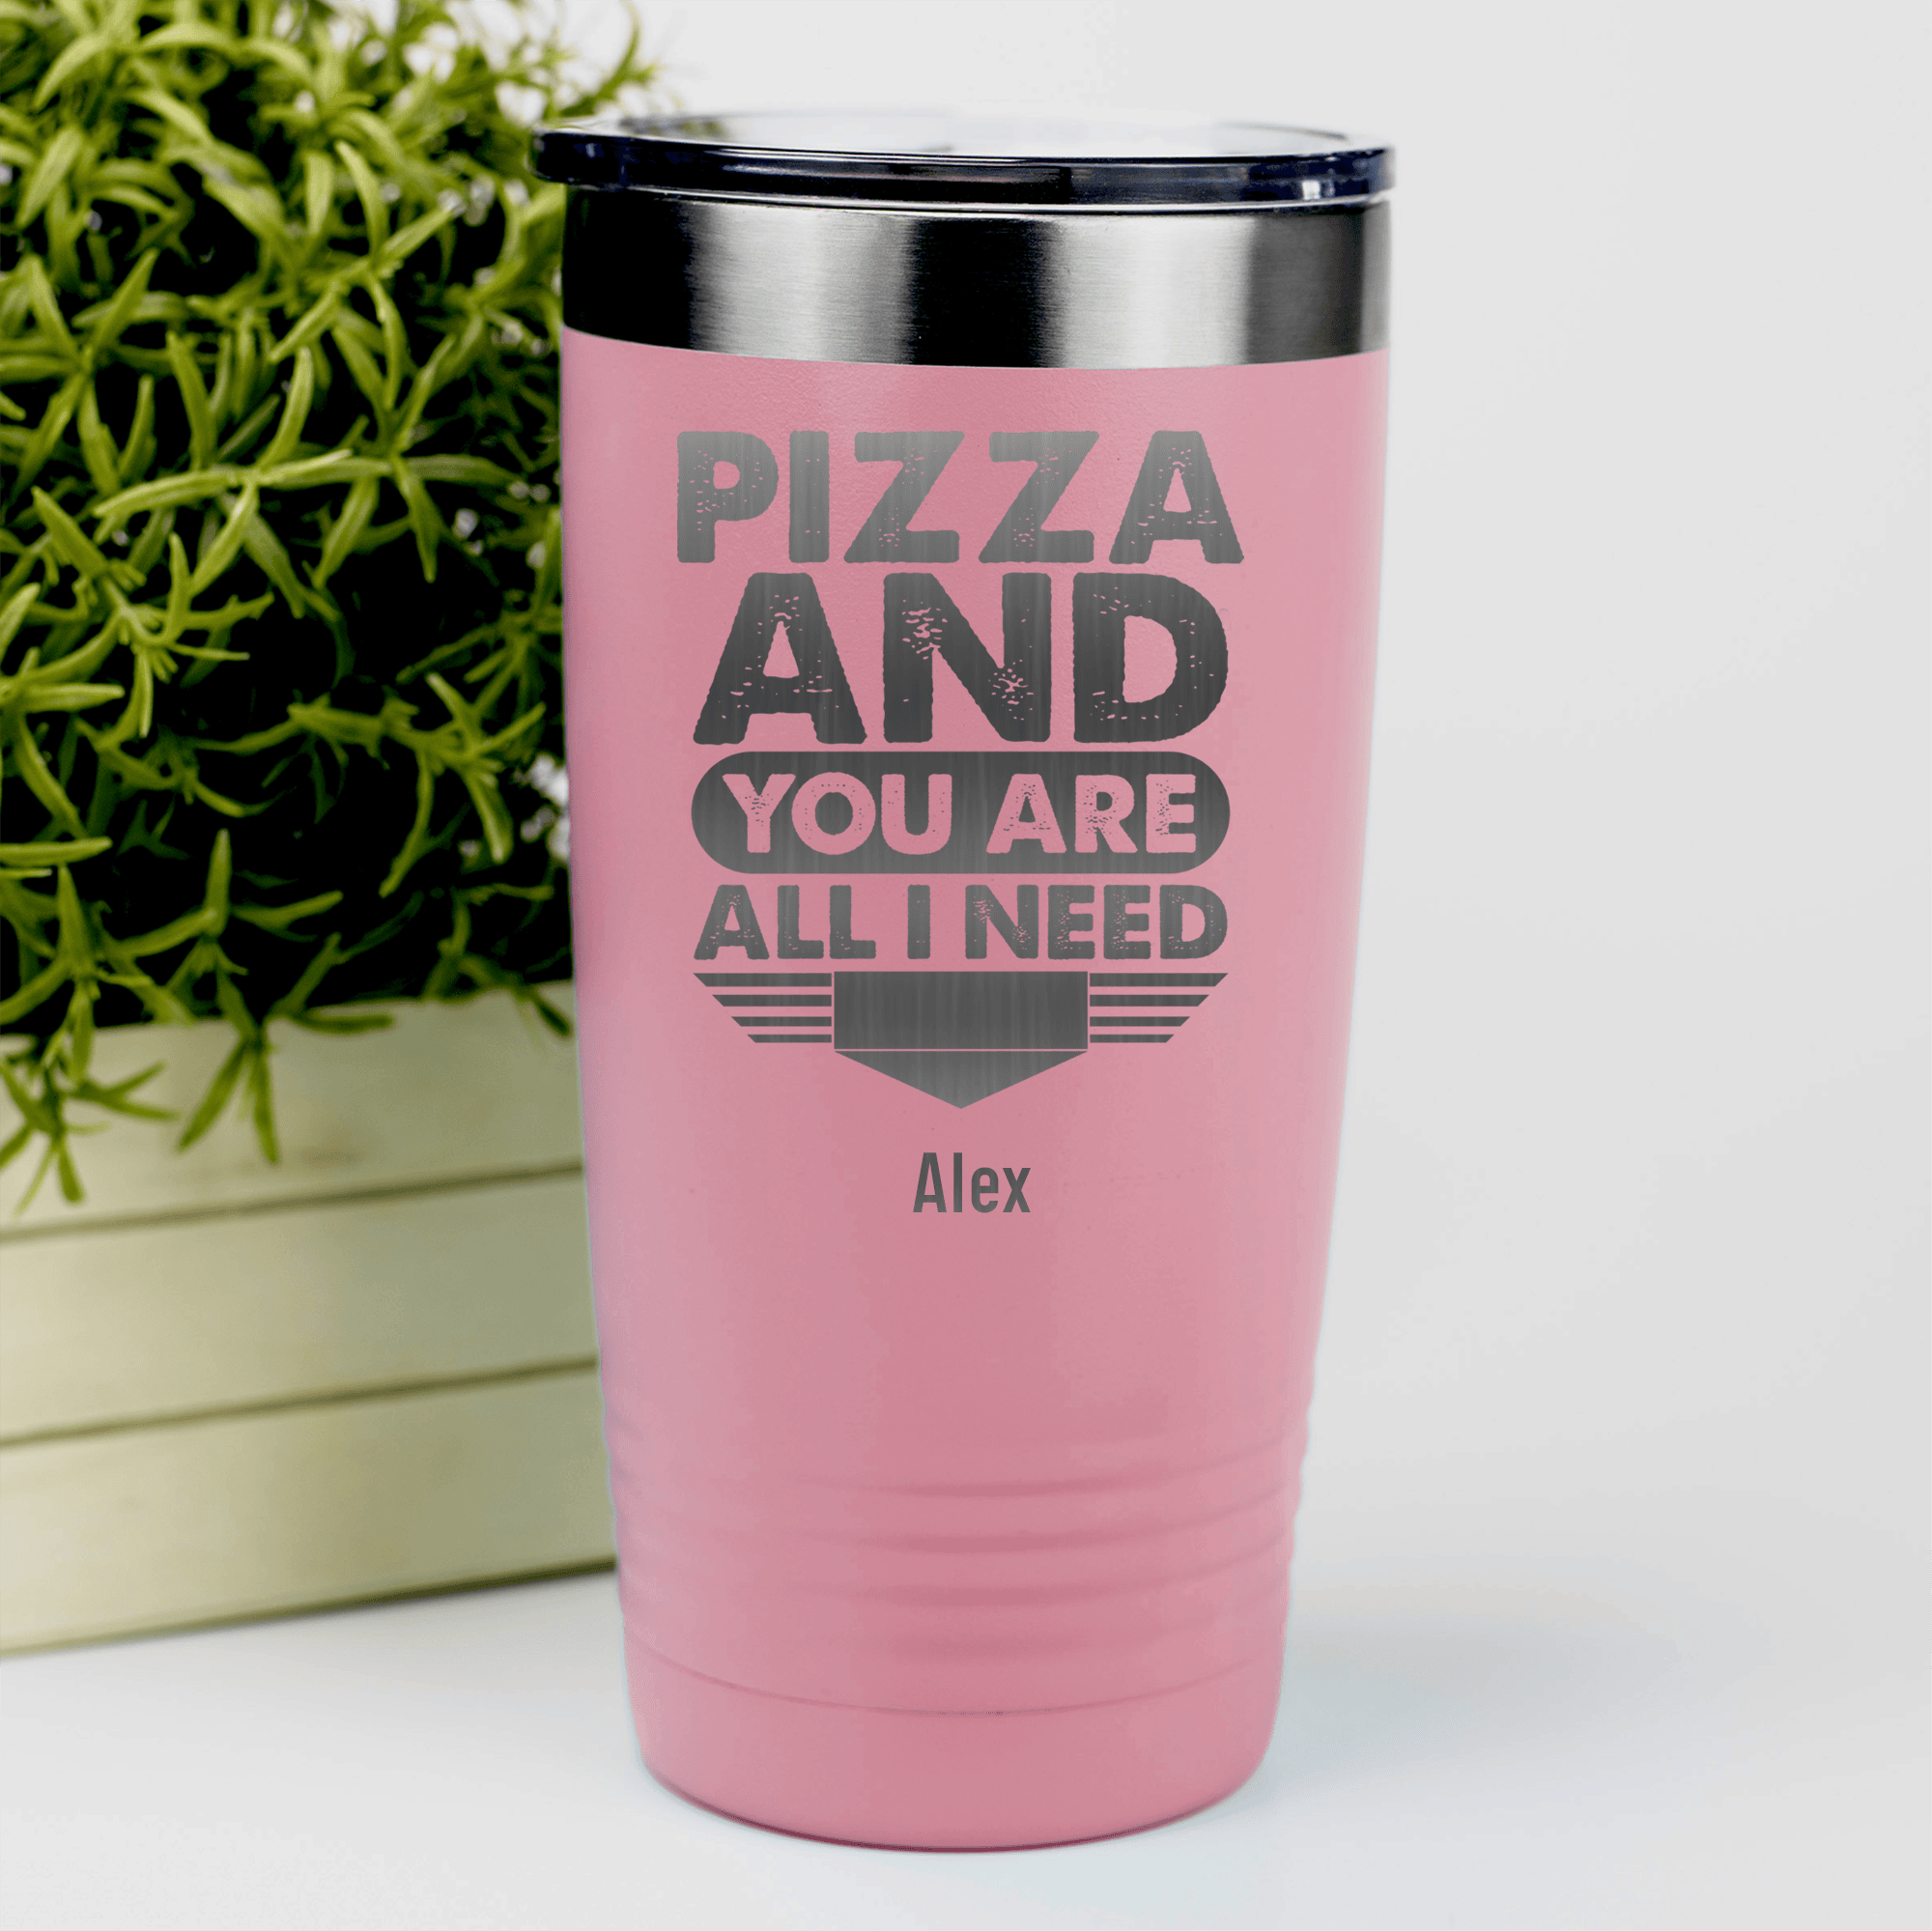 Salmon Best Friend Tumbler With Pizza And You Are All I Need Design